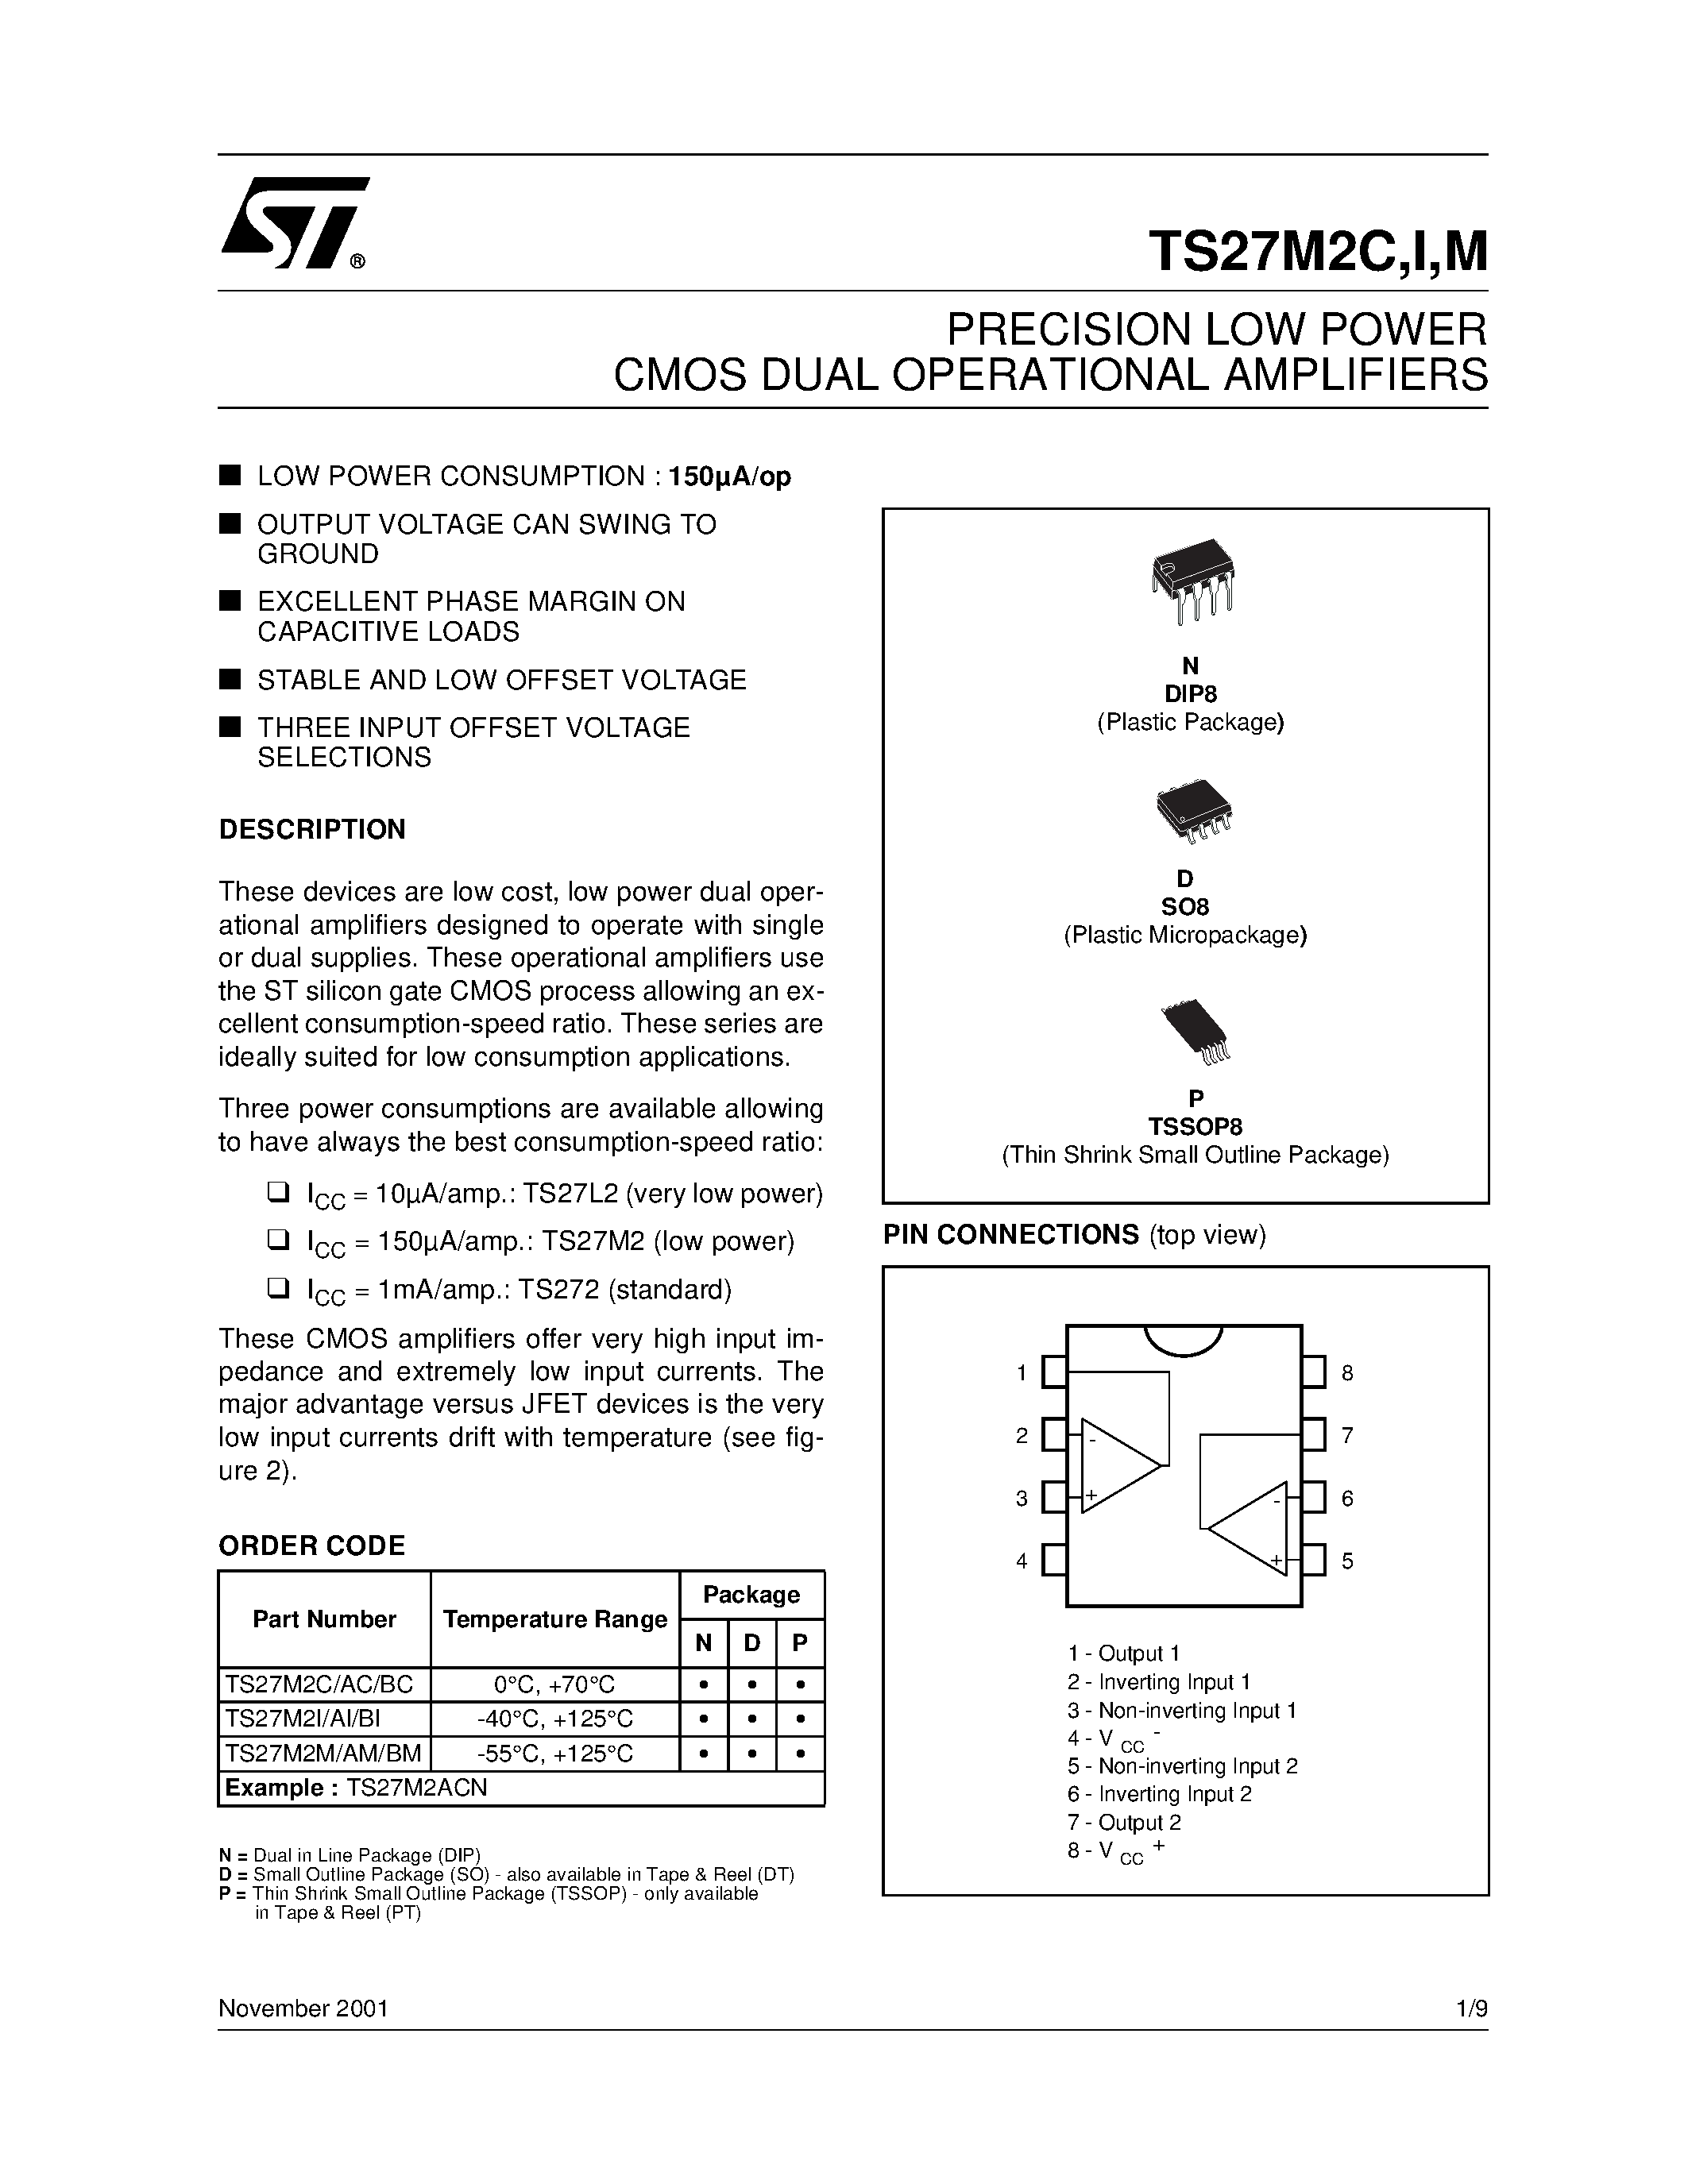 Datasheet TS27M2AI - PRECISION LOW POWER CMOS DUAL OPERATIONAL AMPLIFIERS page 1